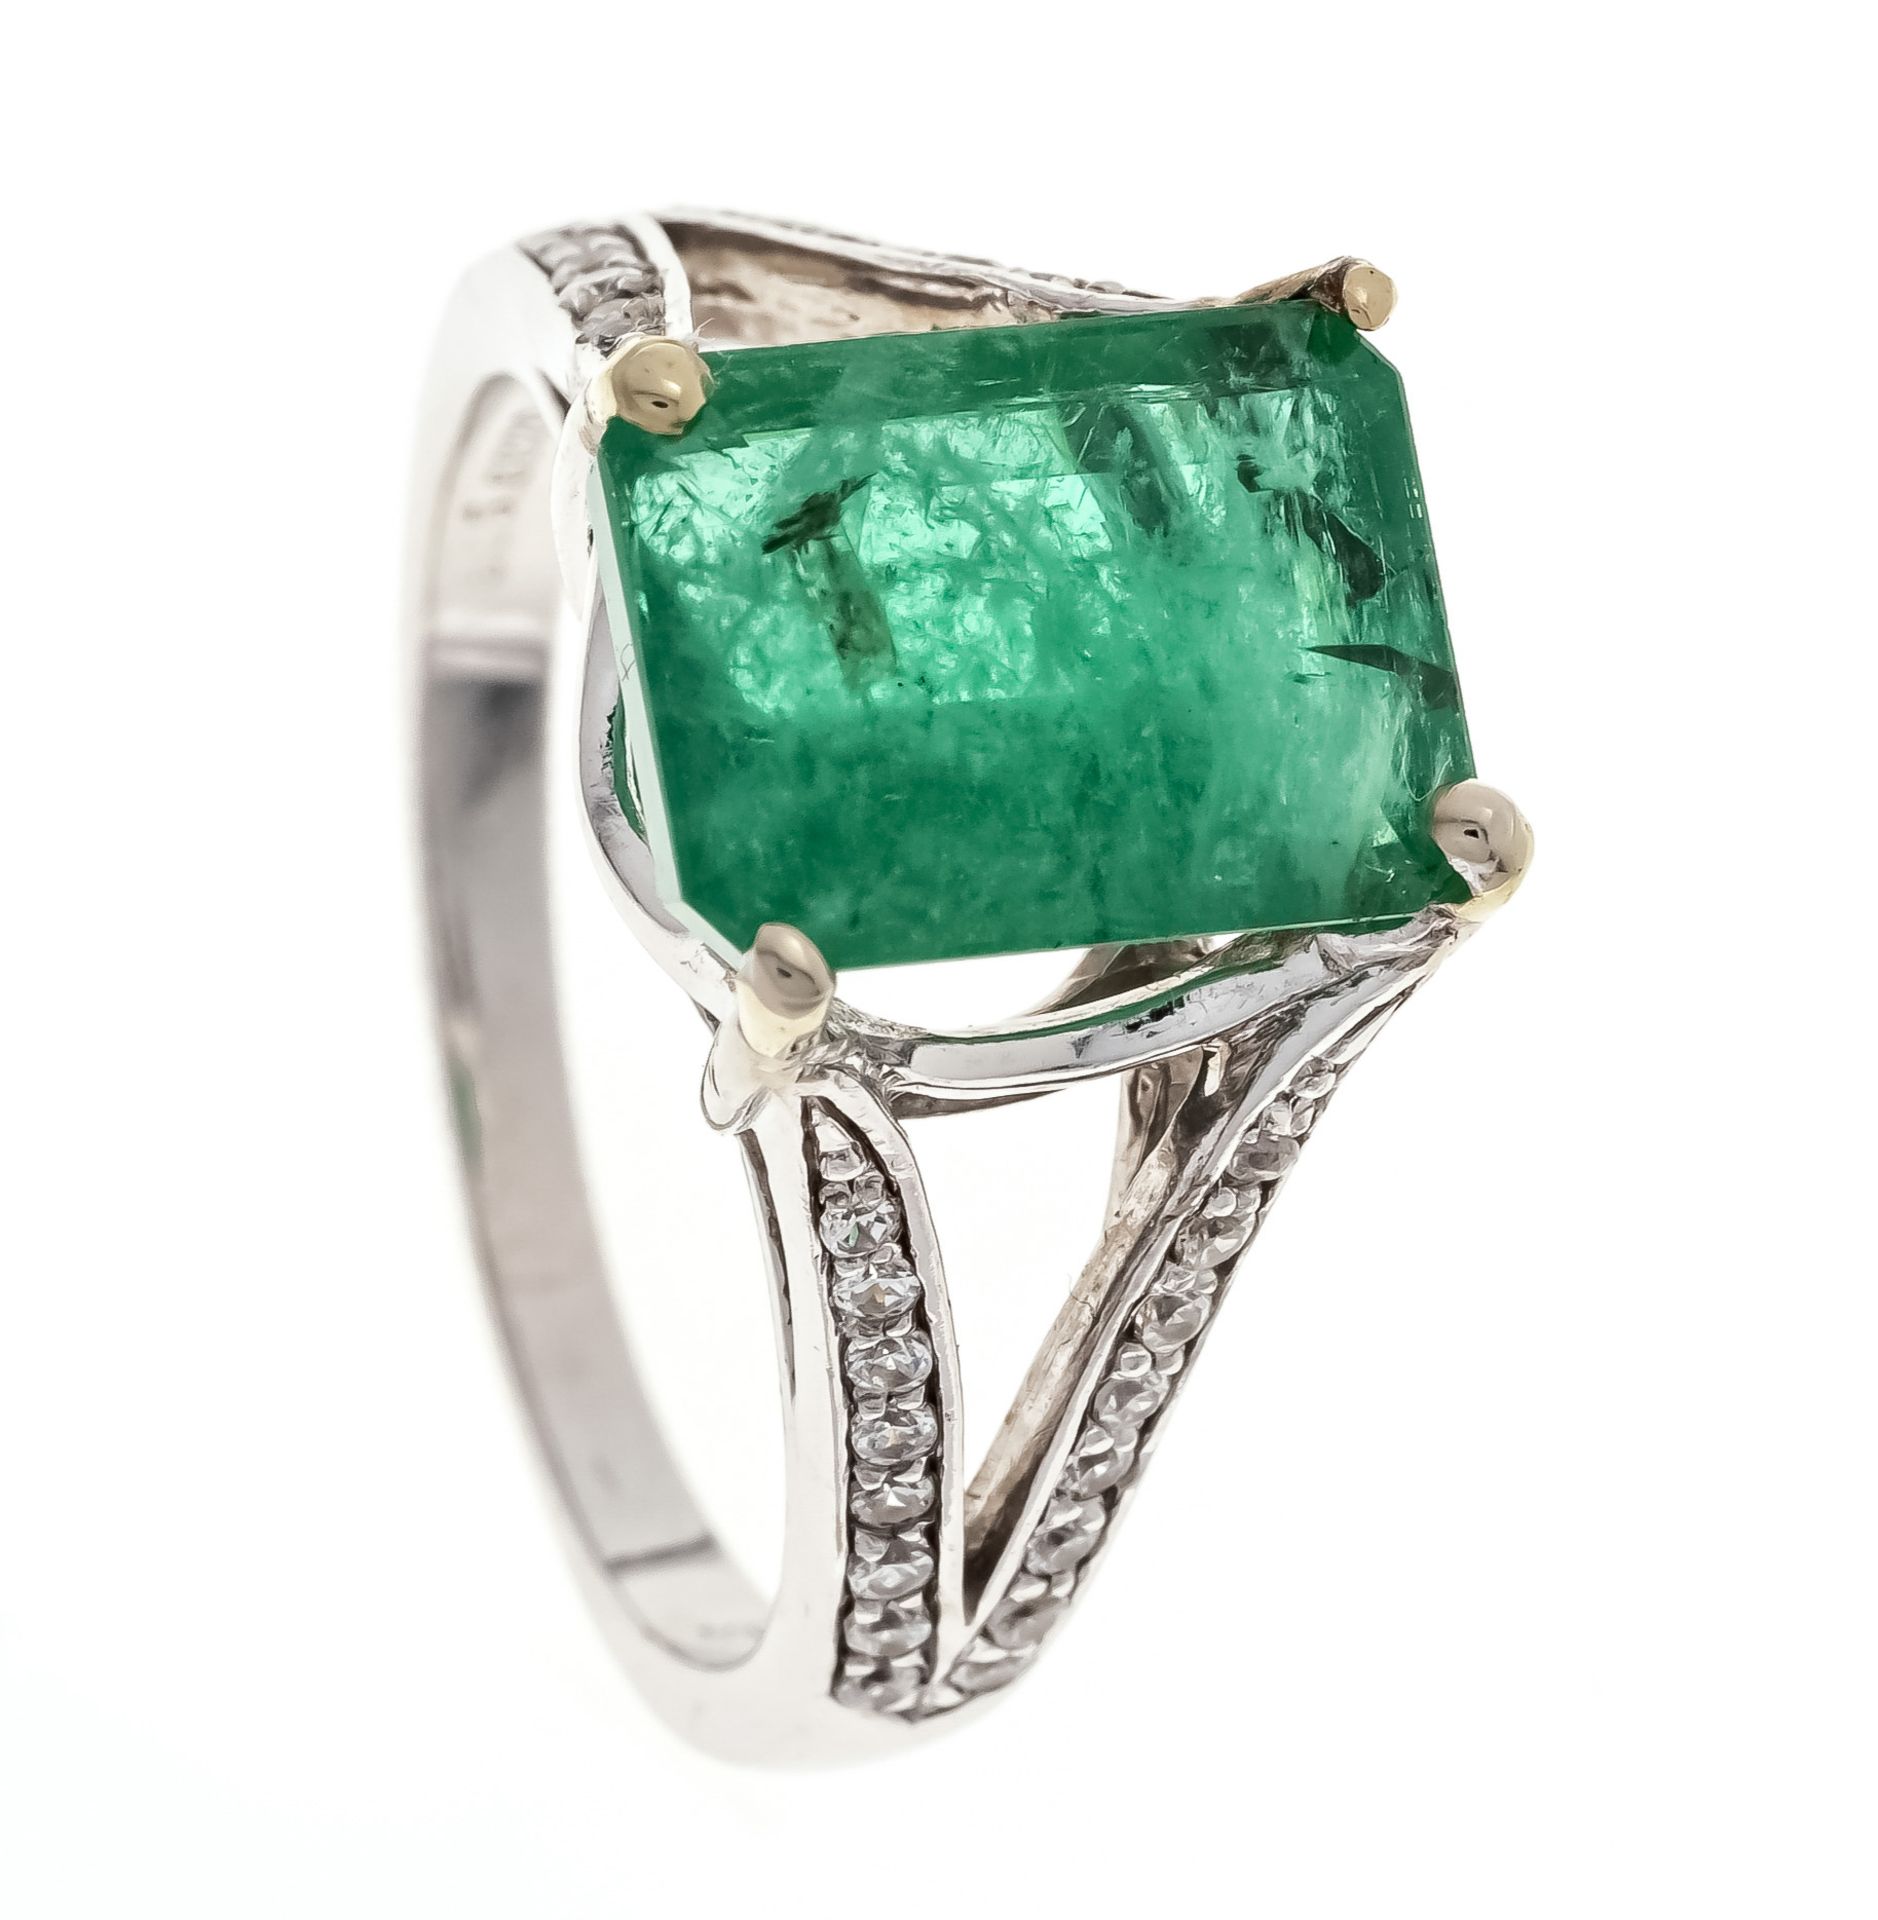 Emerald diamond ring WG 585/000 with one emerald cut faceted emerald 3,80 ct green, translucent,11,